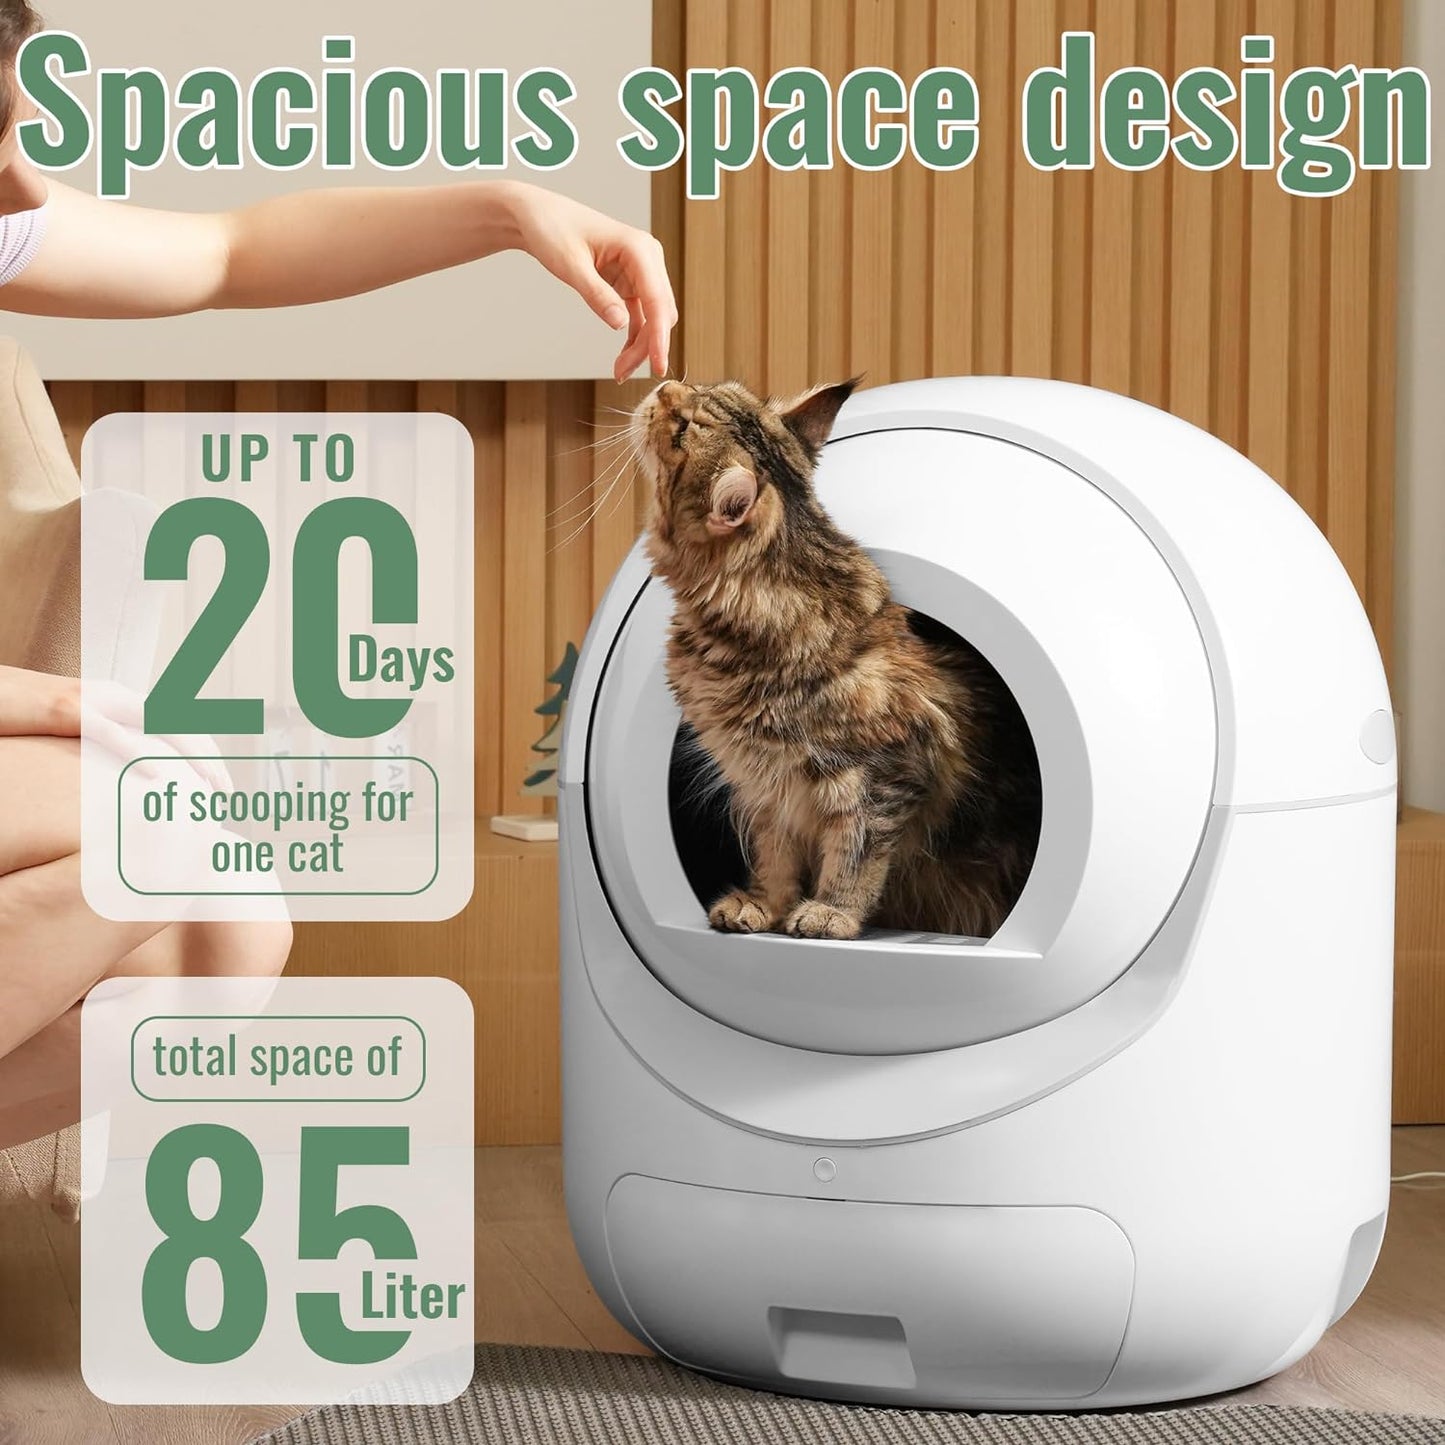 MEEGEEM Self Cleaning Cat Litter Box - 85L Extra Large Automatic Cat Litter Box Self Cleaning for Multiple Cats, Anti-Pinch/Odor-Removal Design, All Litter Can Use, with Garbage Bags/Mats0223